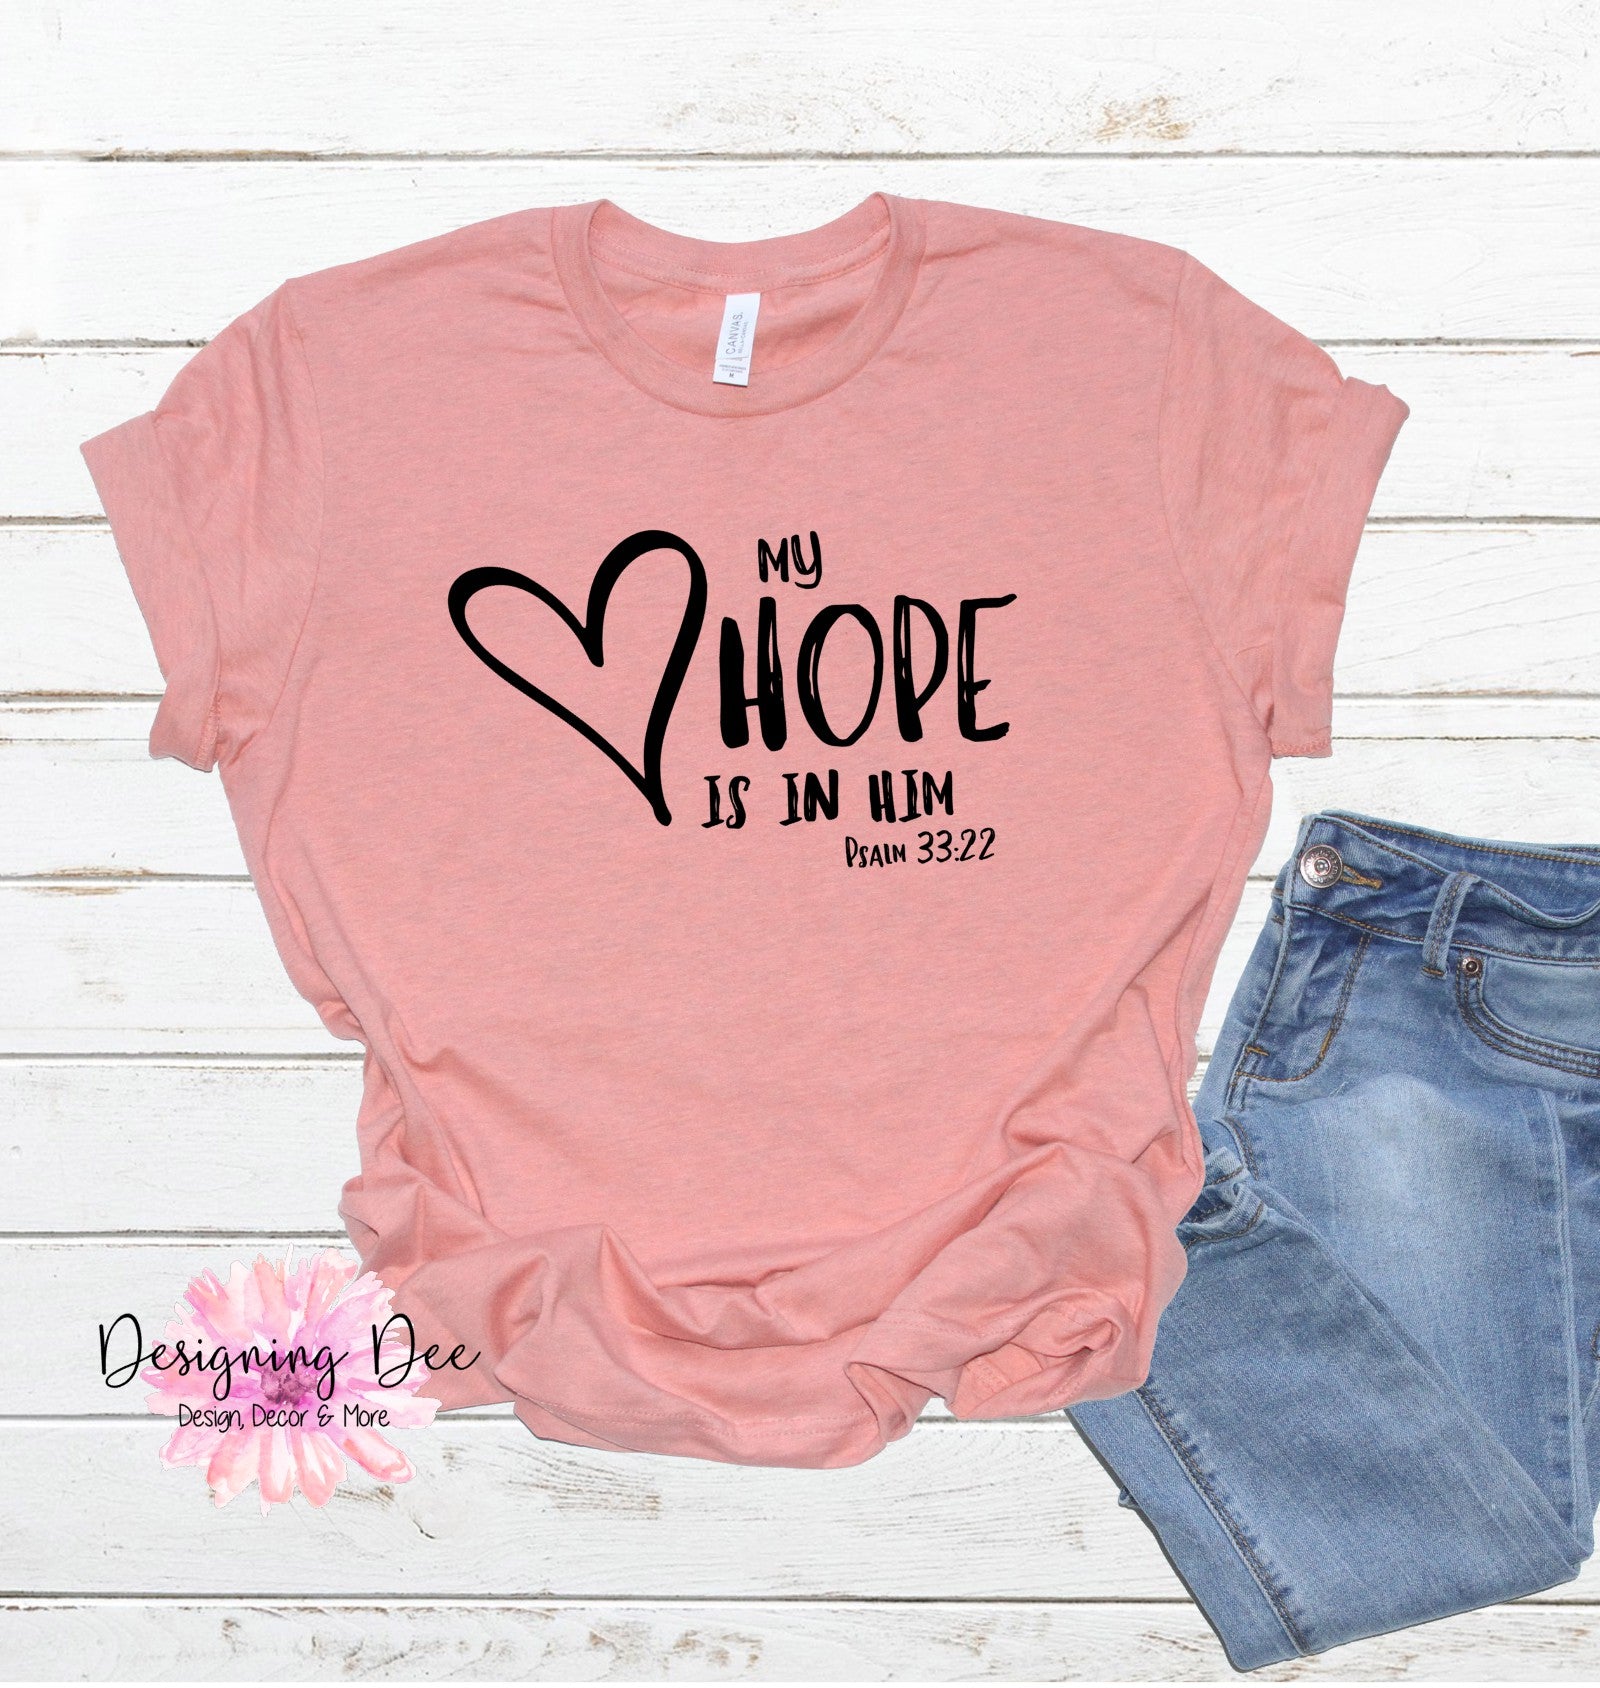 My Hope is In the lord women's shirt